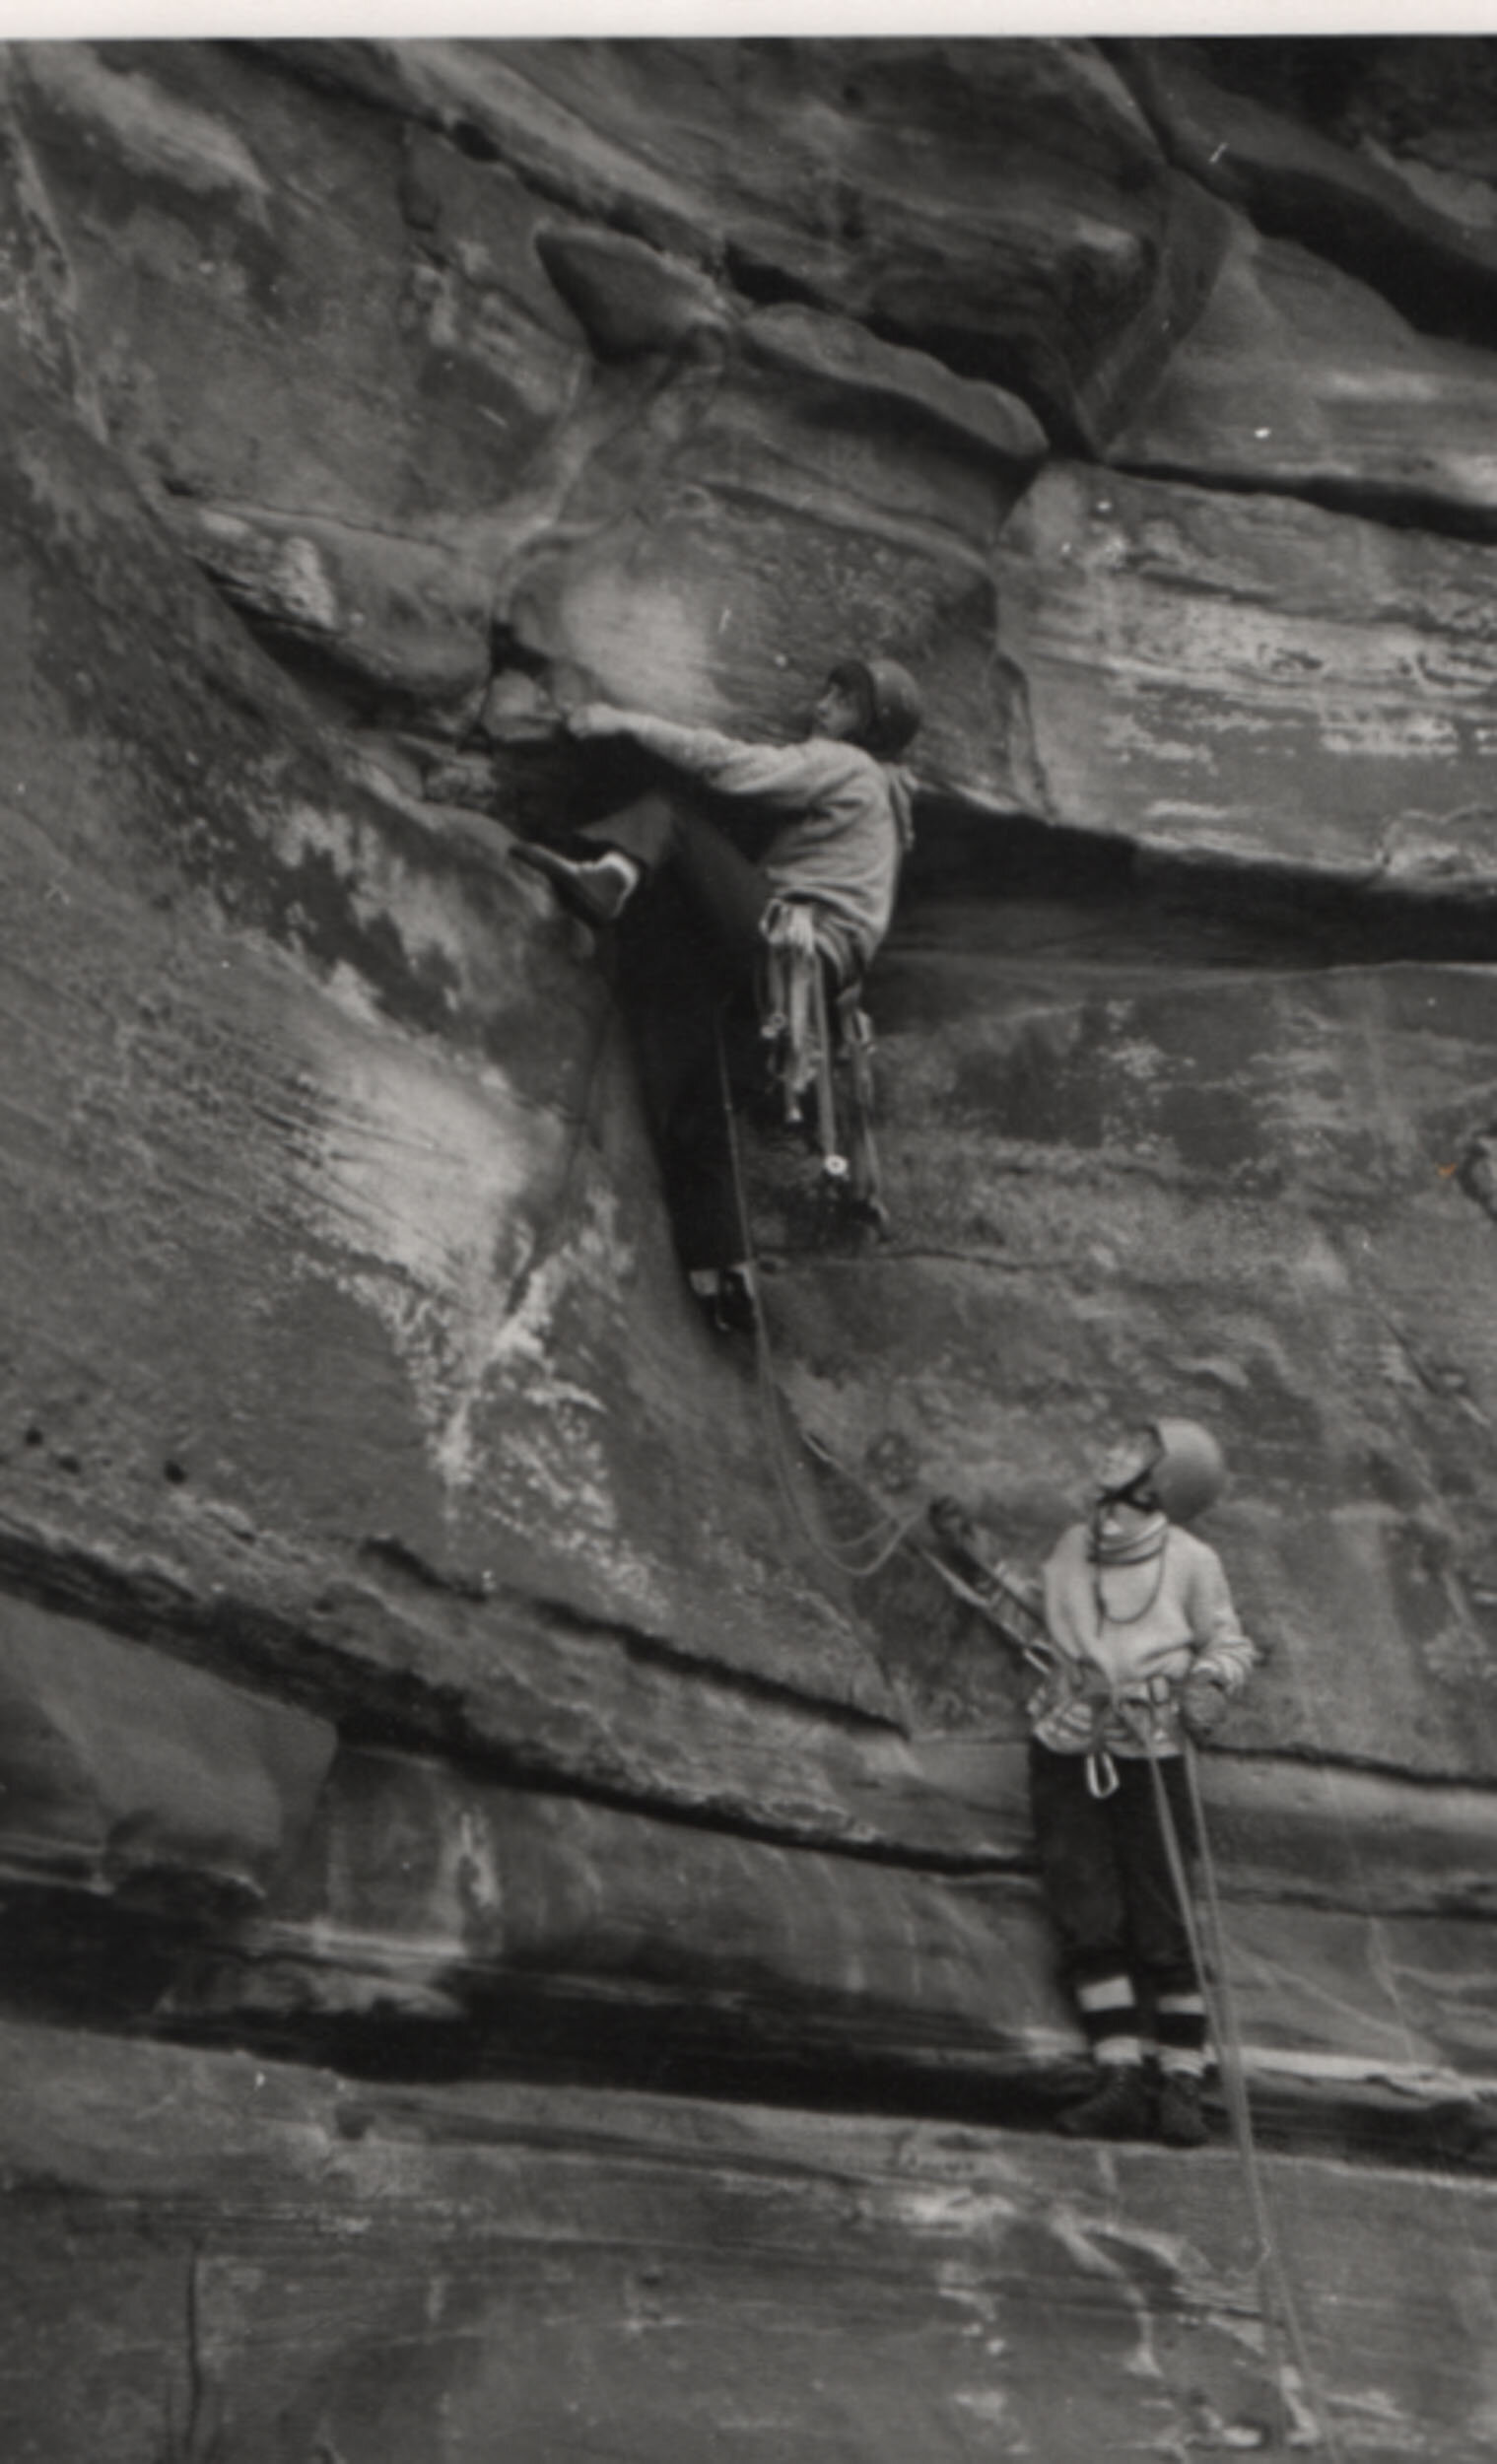 Shirley Angell and Joann Greenhow: a necky move on sandstone at St Bees Head, Cumbria in 1970